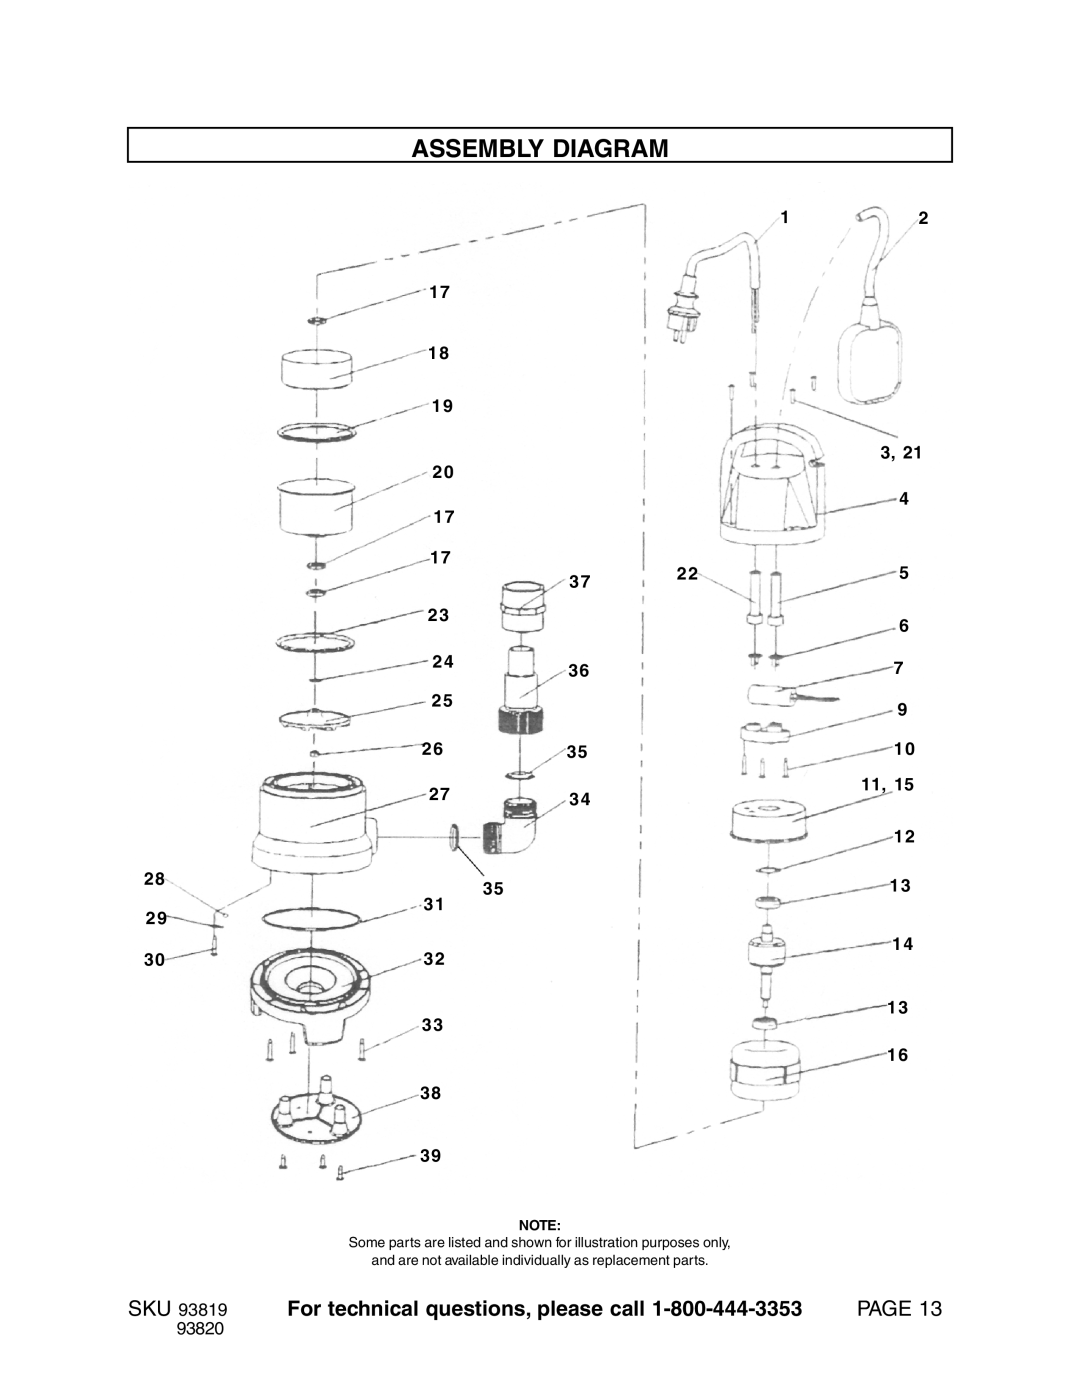 Harbor Freight Tools Model 93819 Assembly Diagram, For technical questions, please call, Page, 2635 2734, 10 11, 93820 